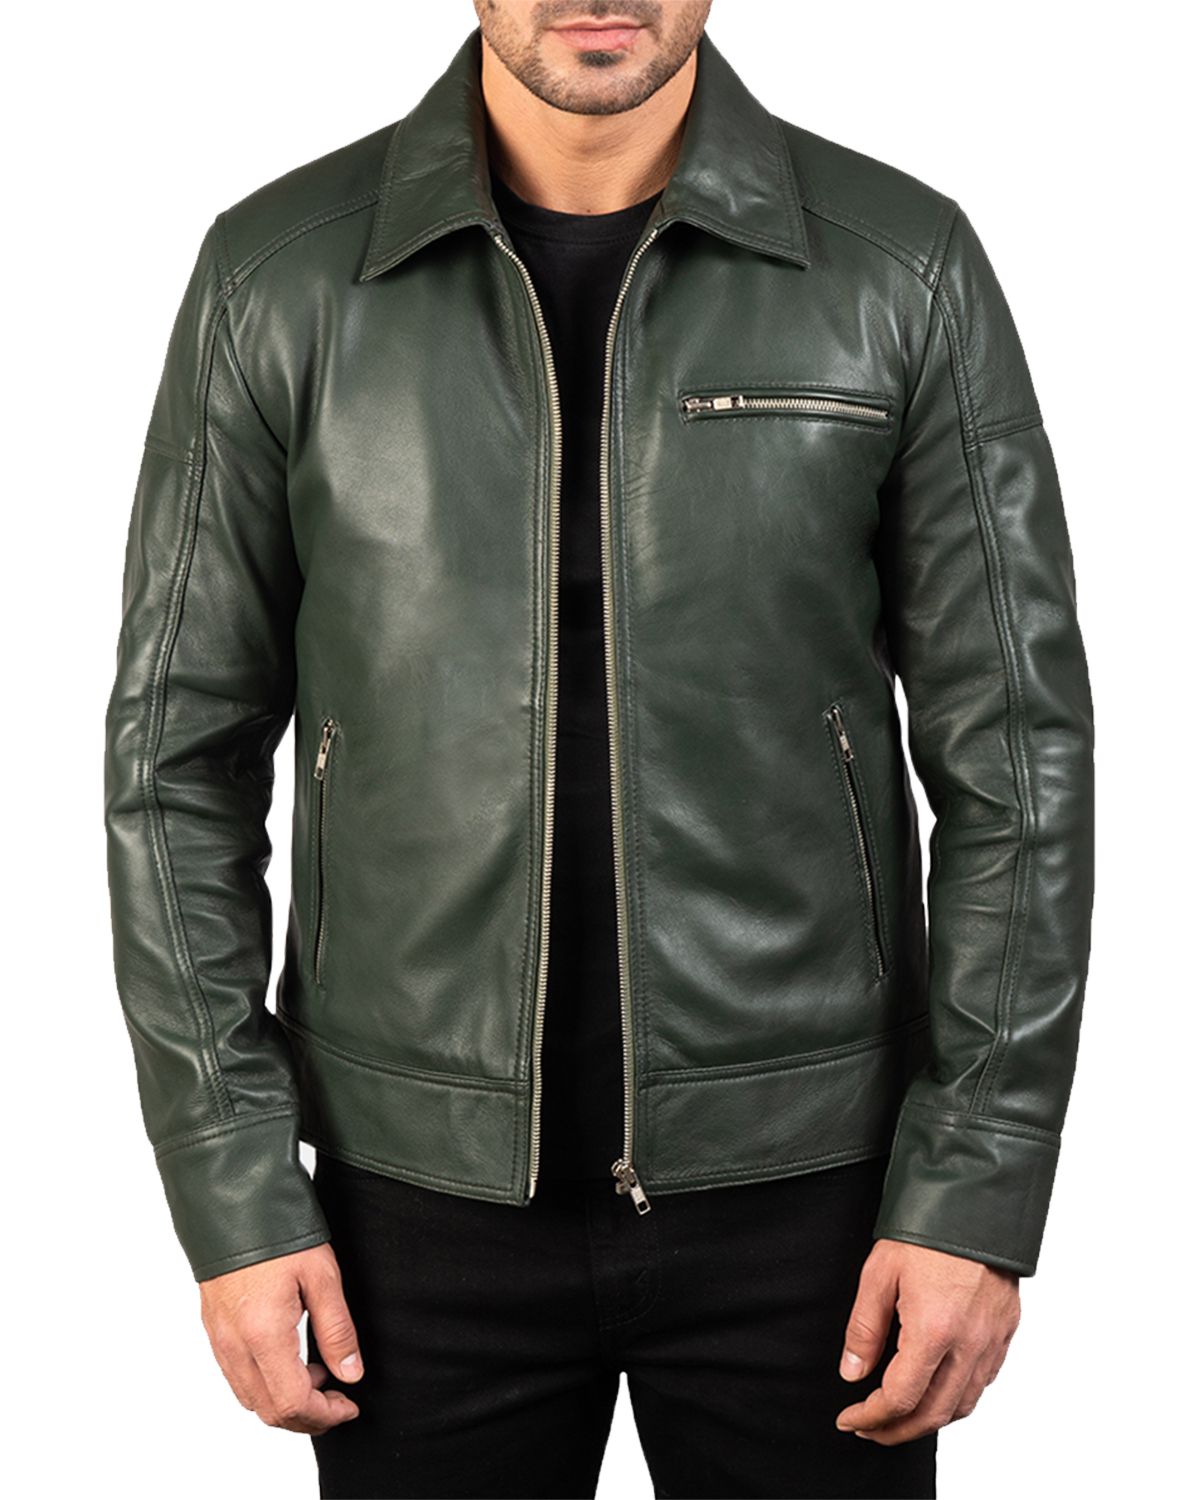 Tom Ford Leather Biker Jacket Buy in New York, New Jersey, USA